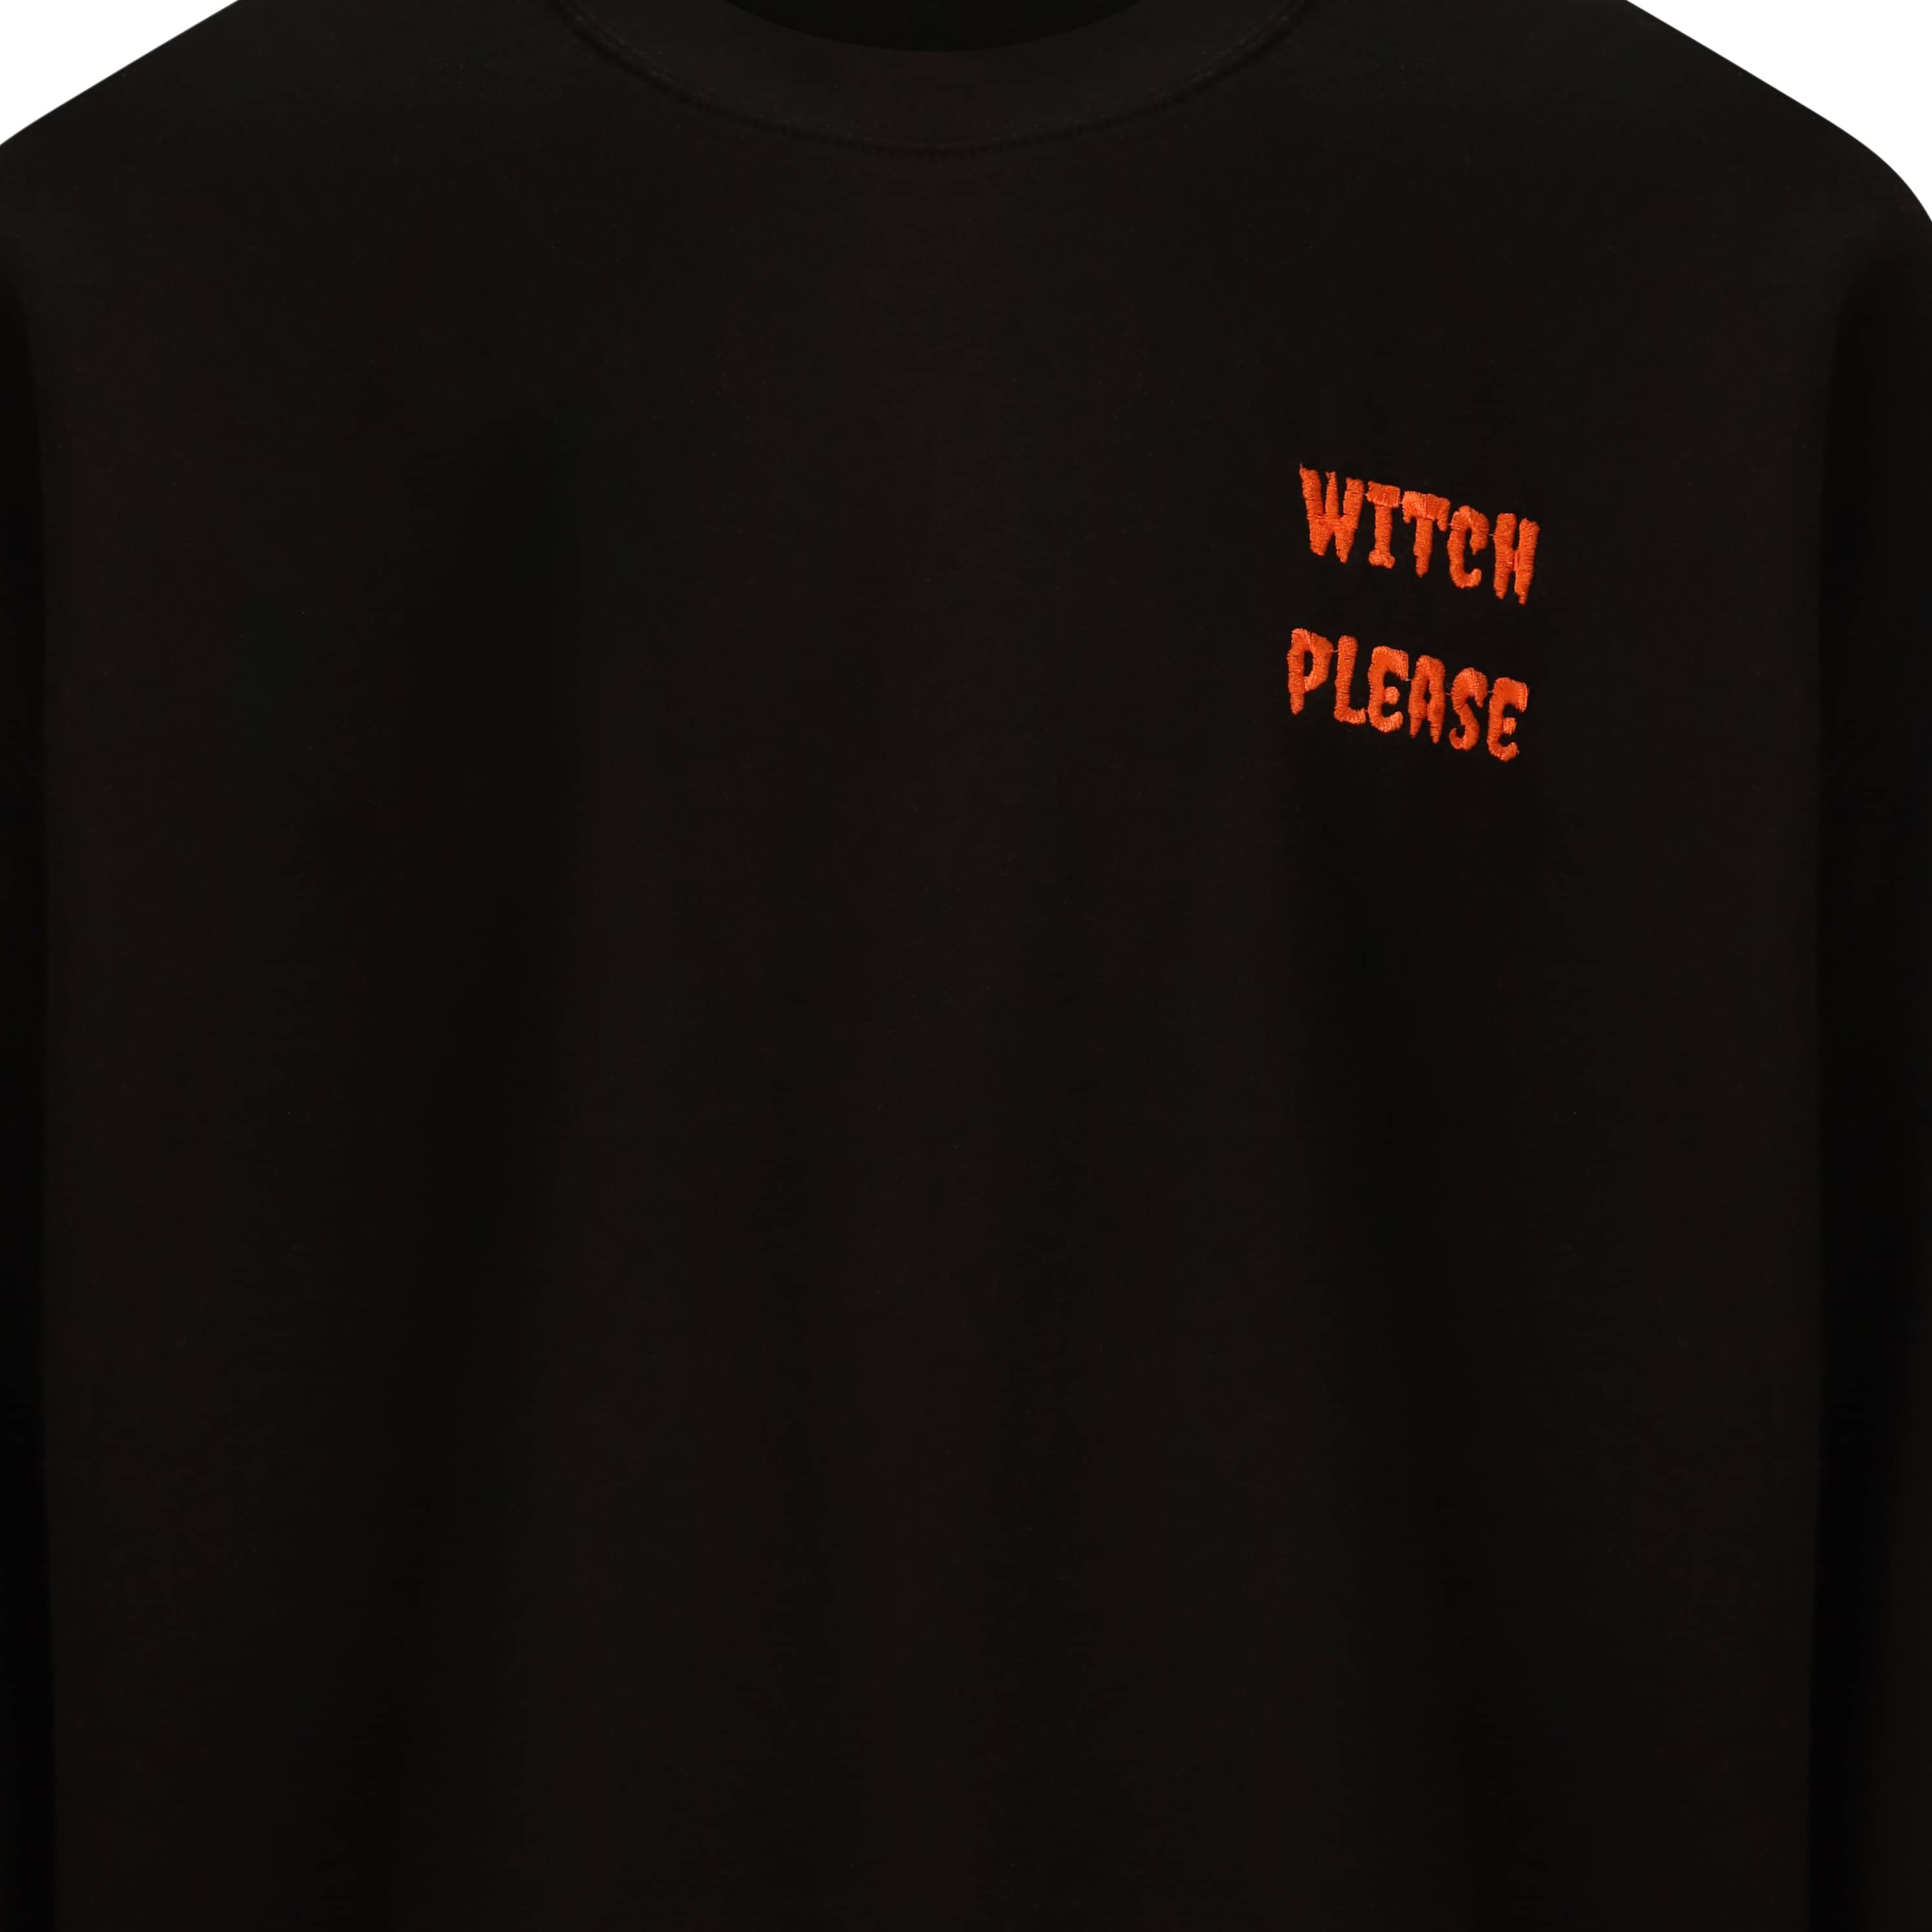 Jet black jumper with pumpkin orange embroidery that reads witch please on the left hand side of the chest. Witch please is written in a halloween creepy style text and is in all caps